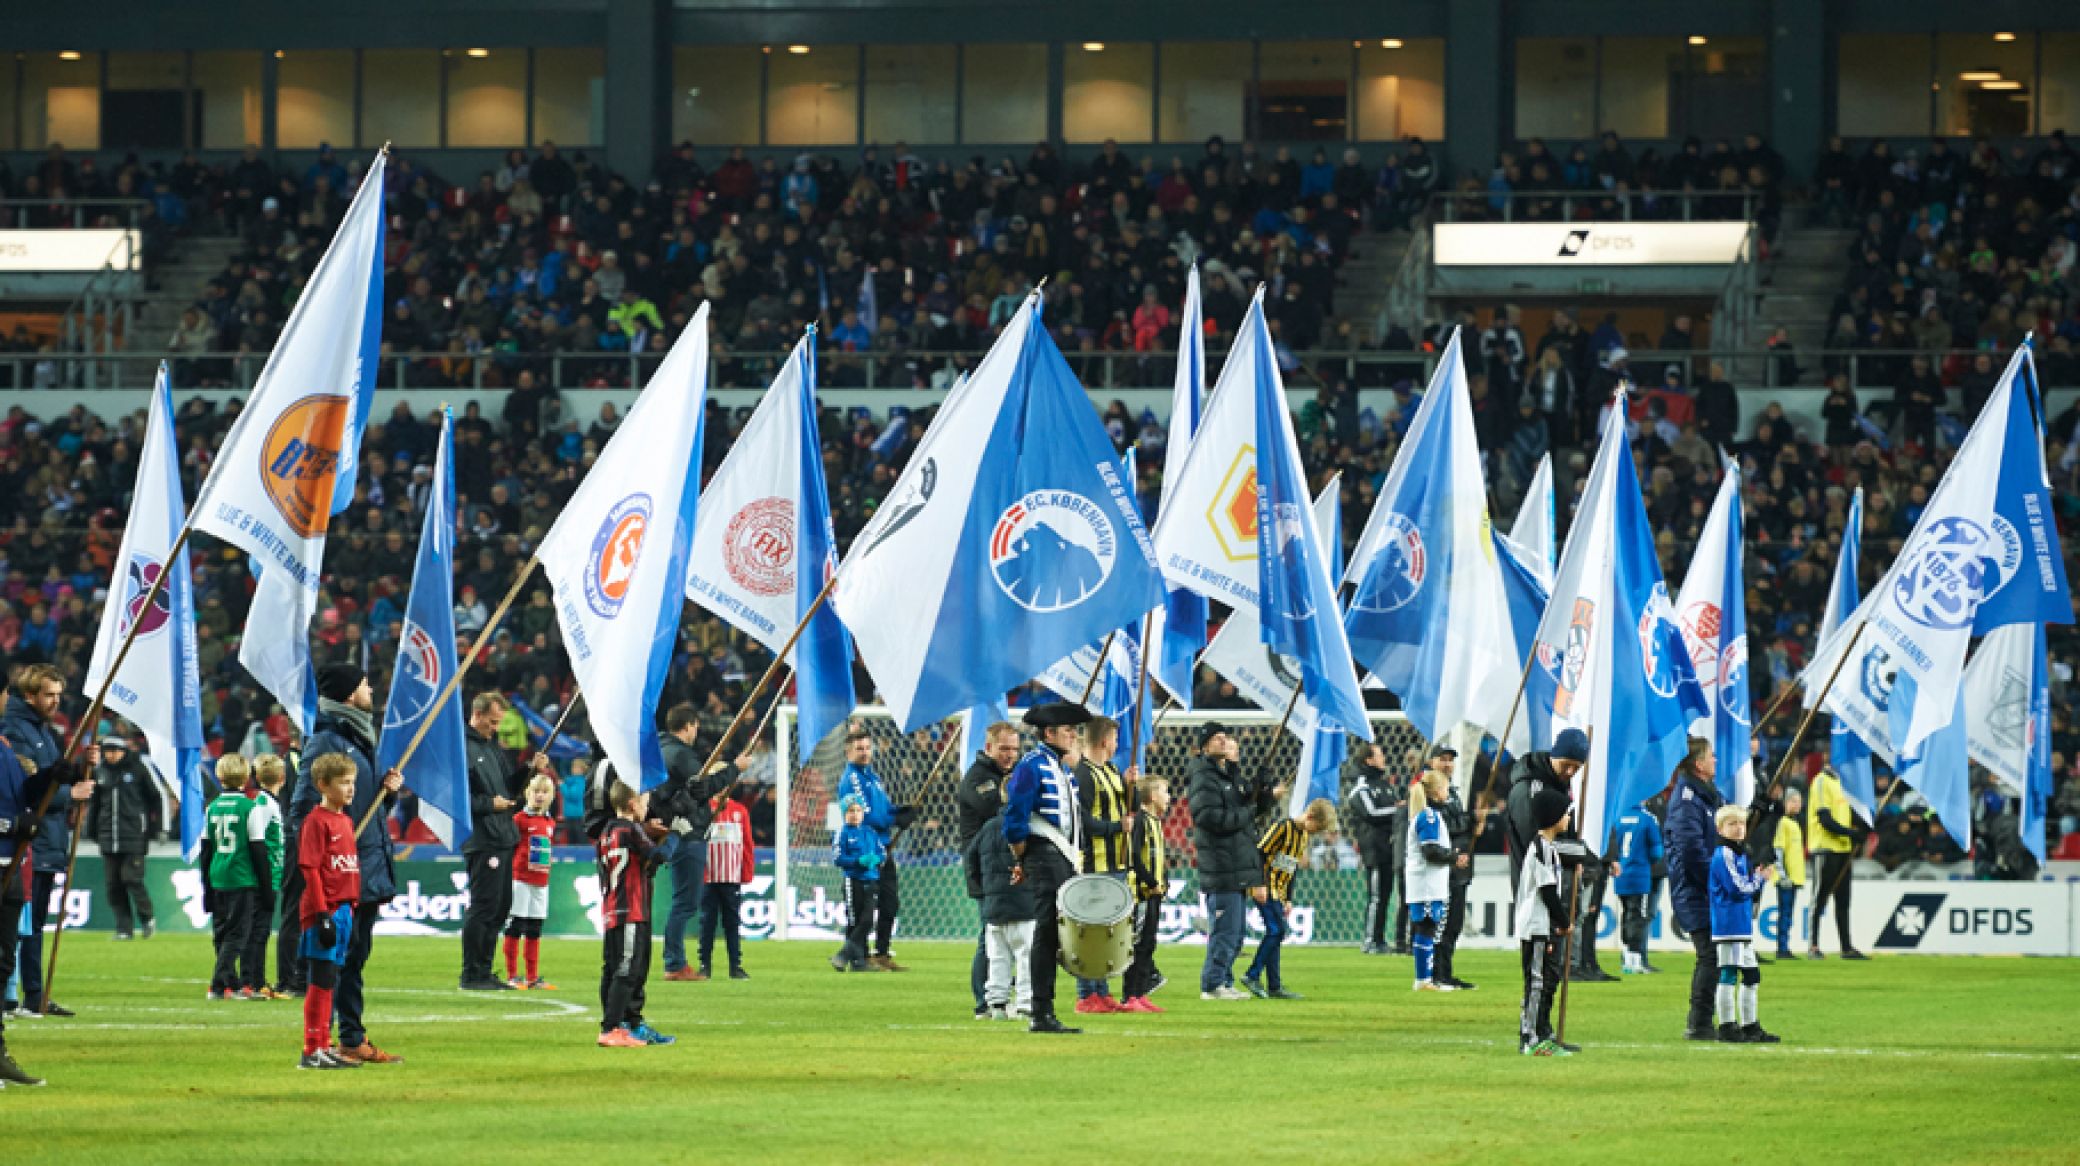 Blue & White Banner Day mod Lyngby